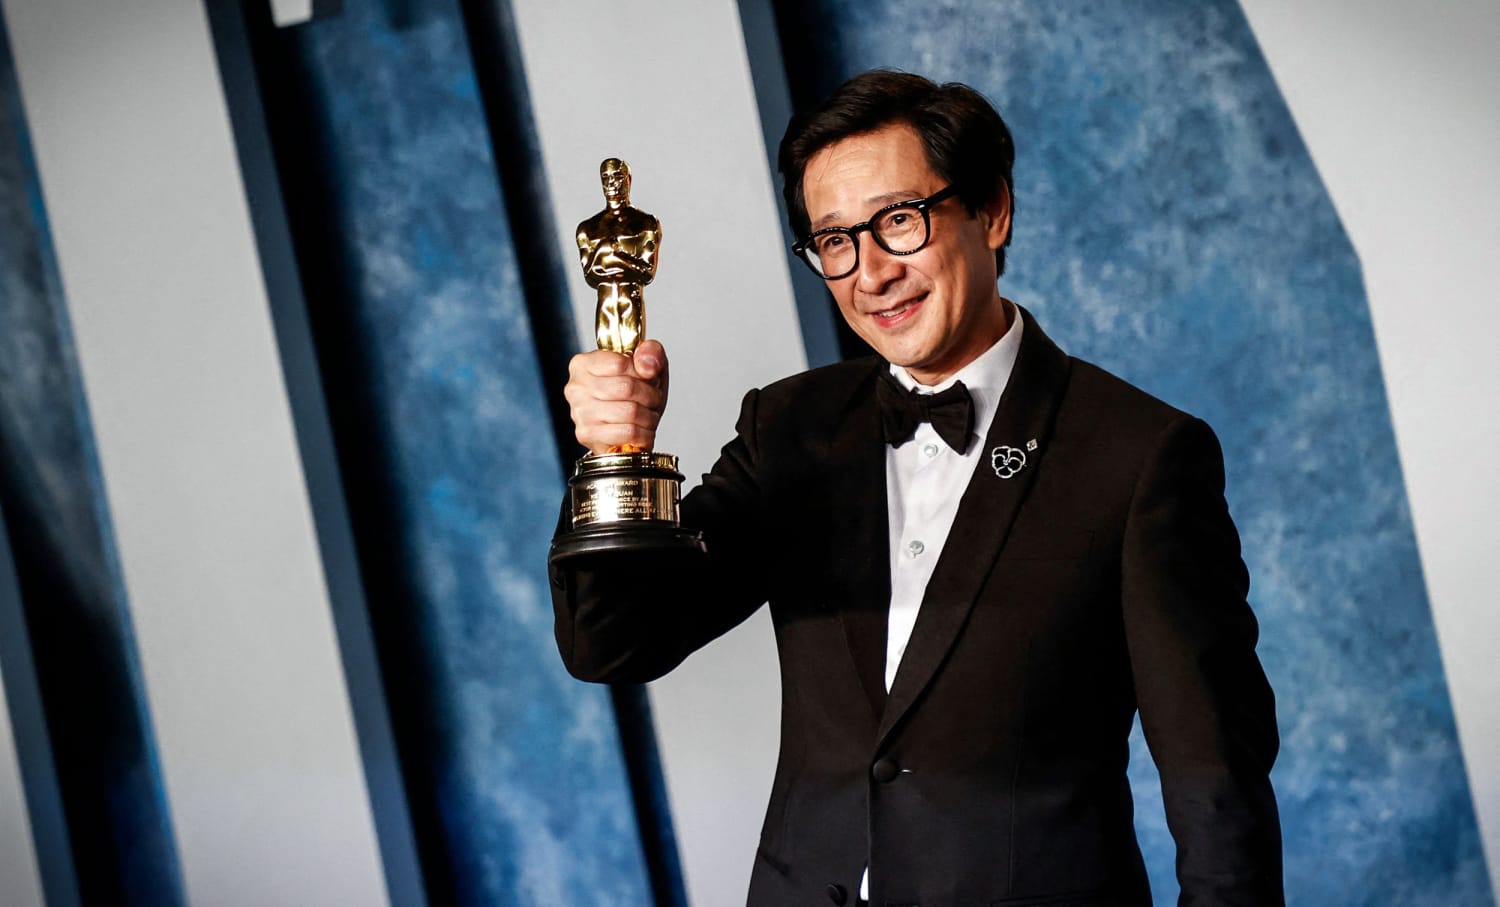 Ke Huy Quan says Oscars speech was a chance to 'publicly' thank his refugee parents